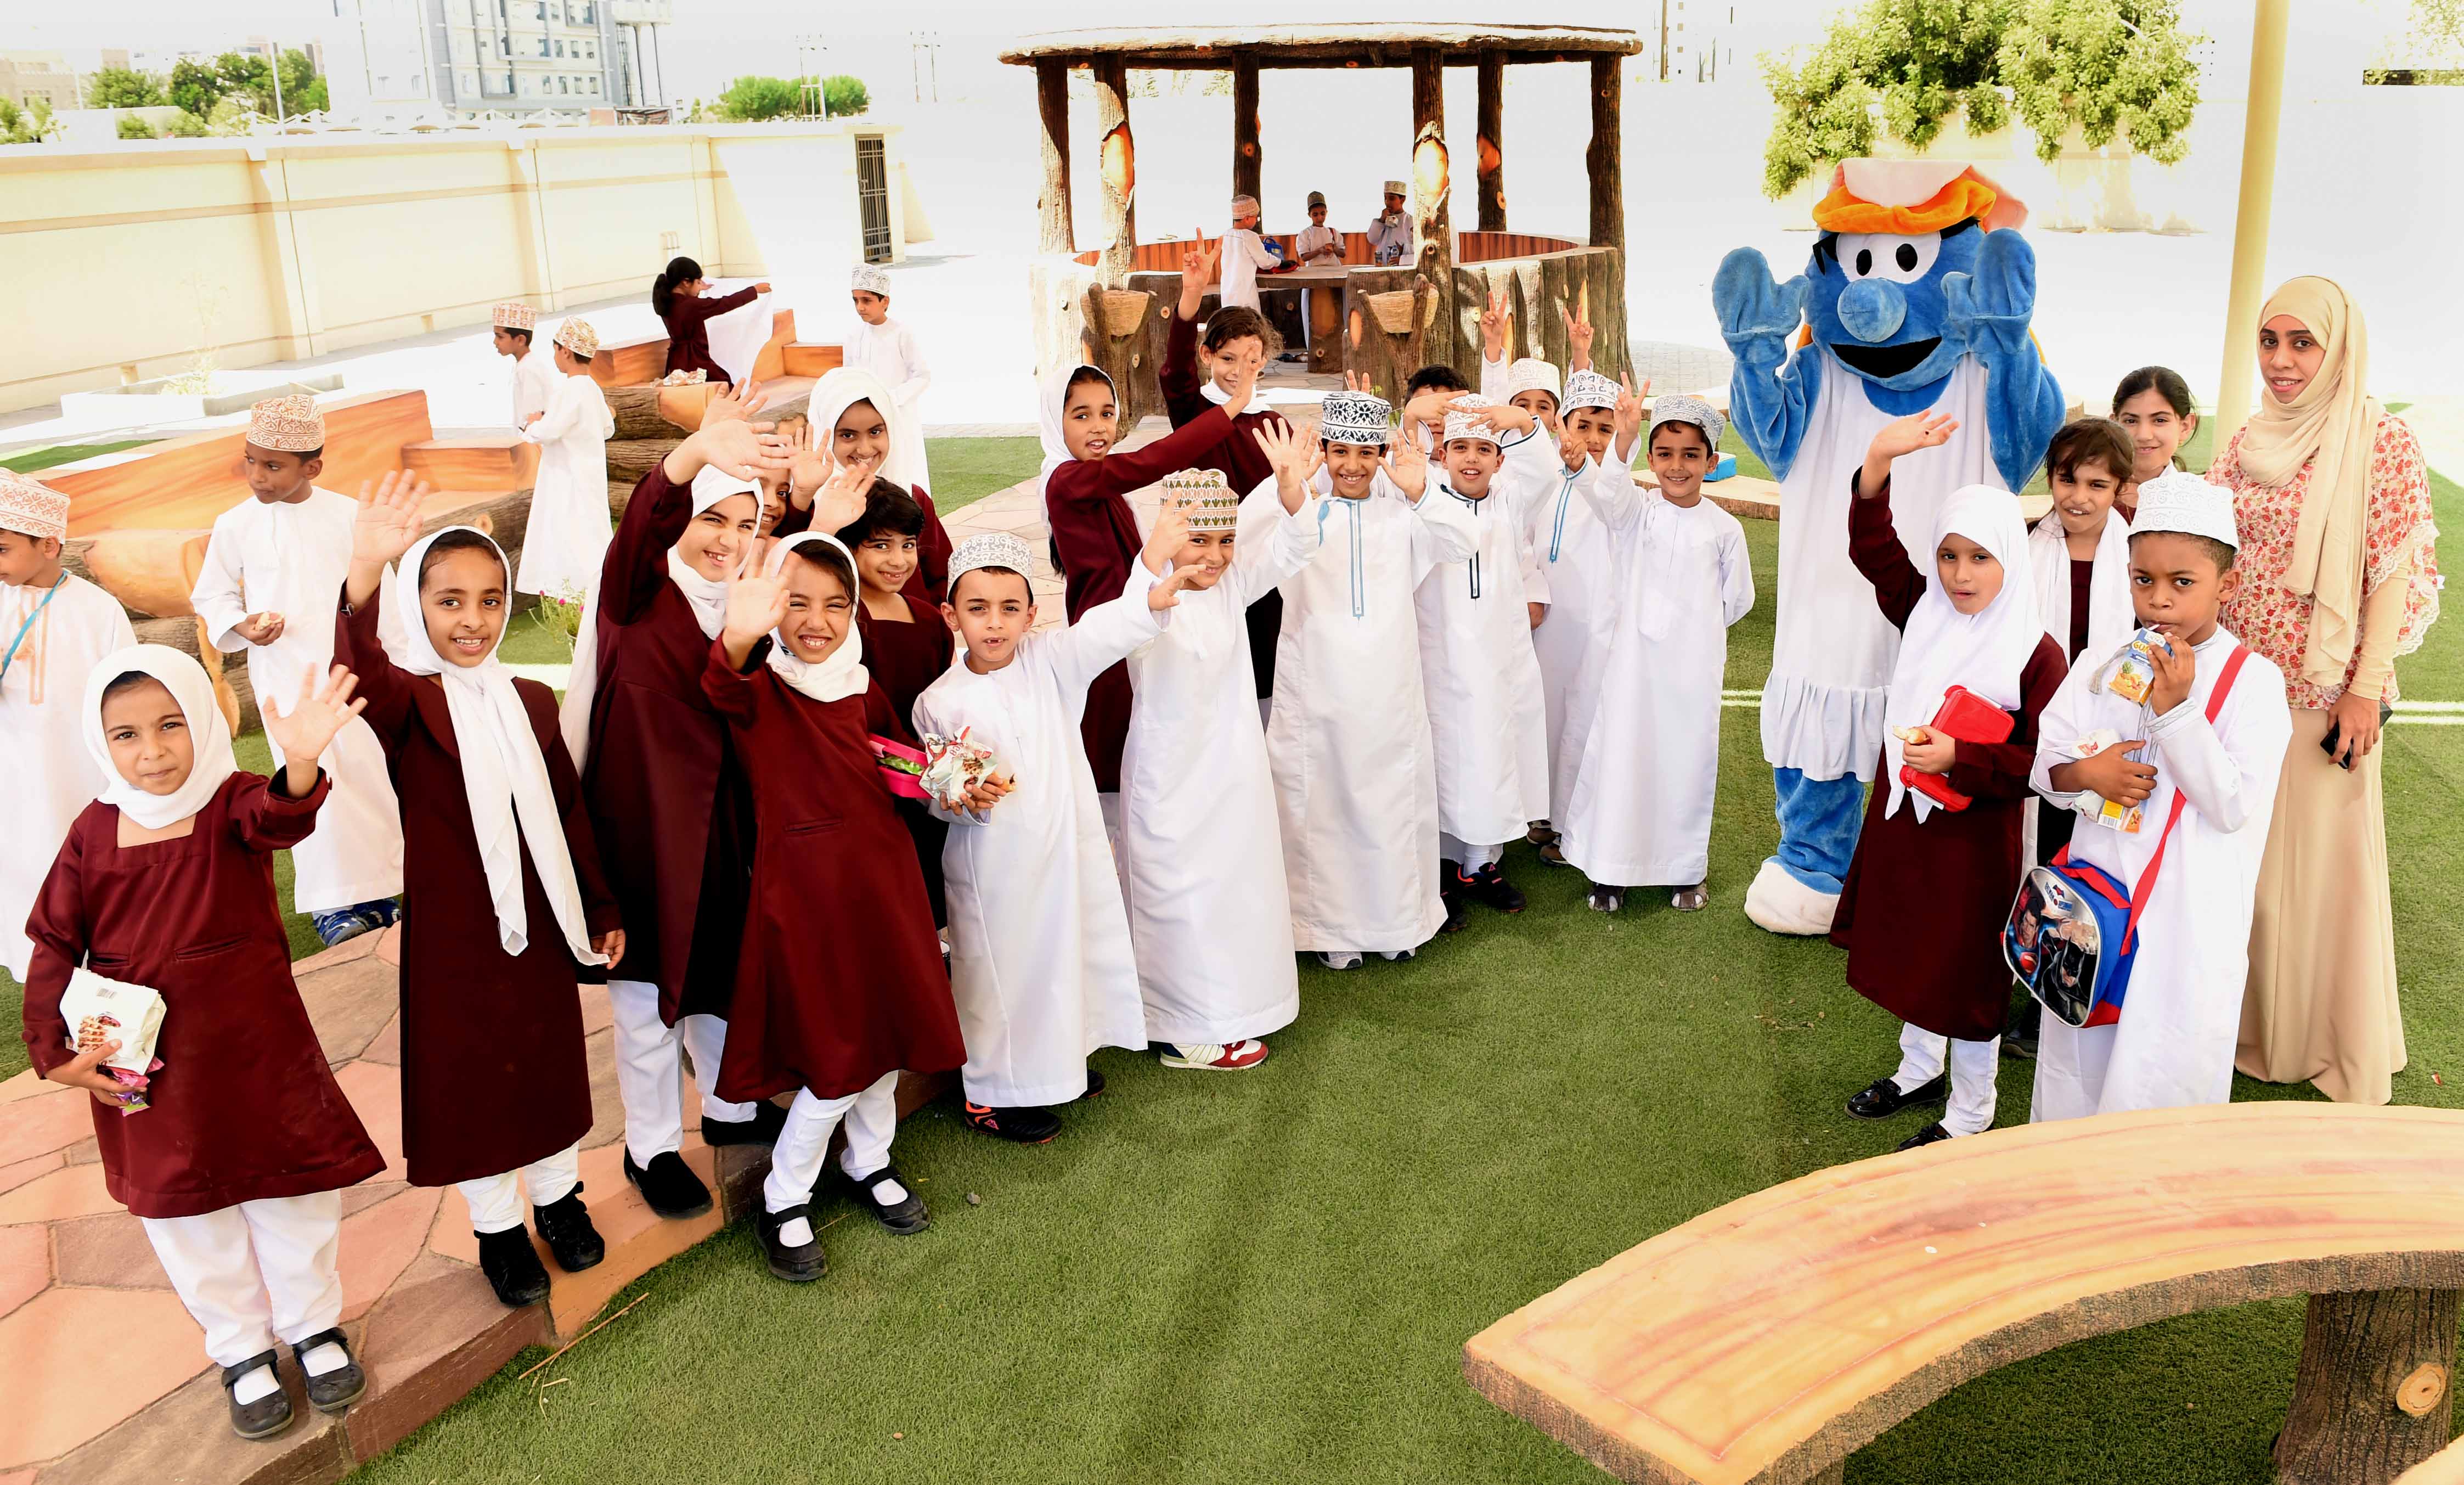 Education and heath conditions of Oman's children improve